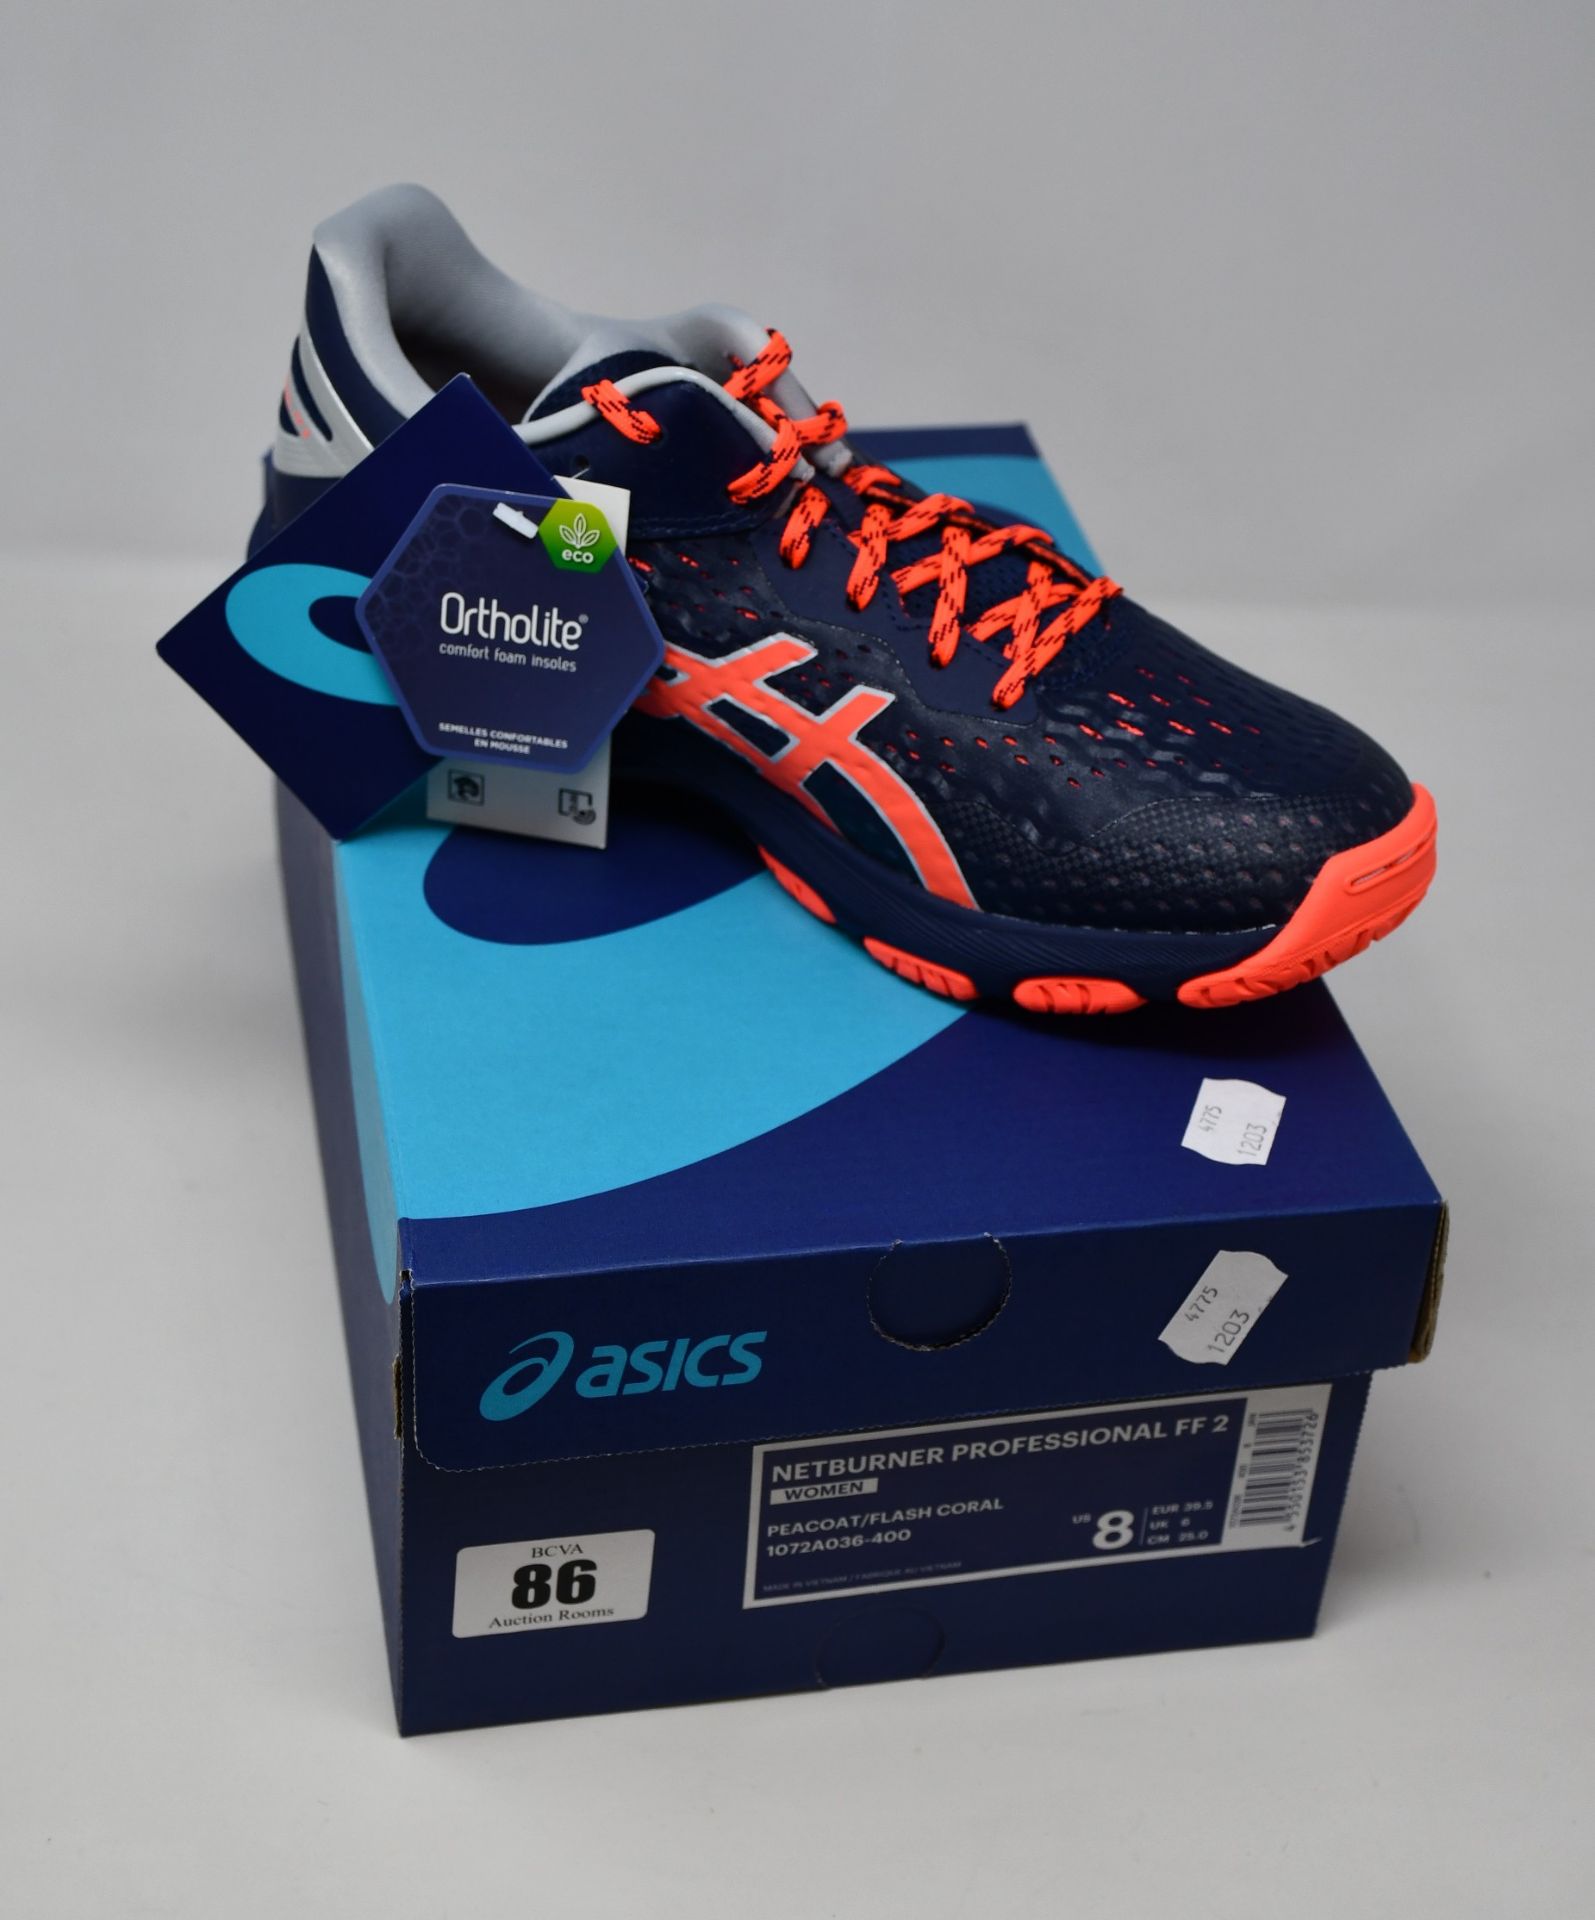 A pair of as new Asics Netburner Super FF 2 trainers (UK 6).